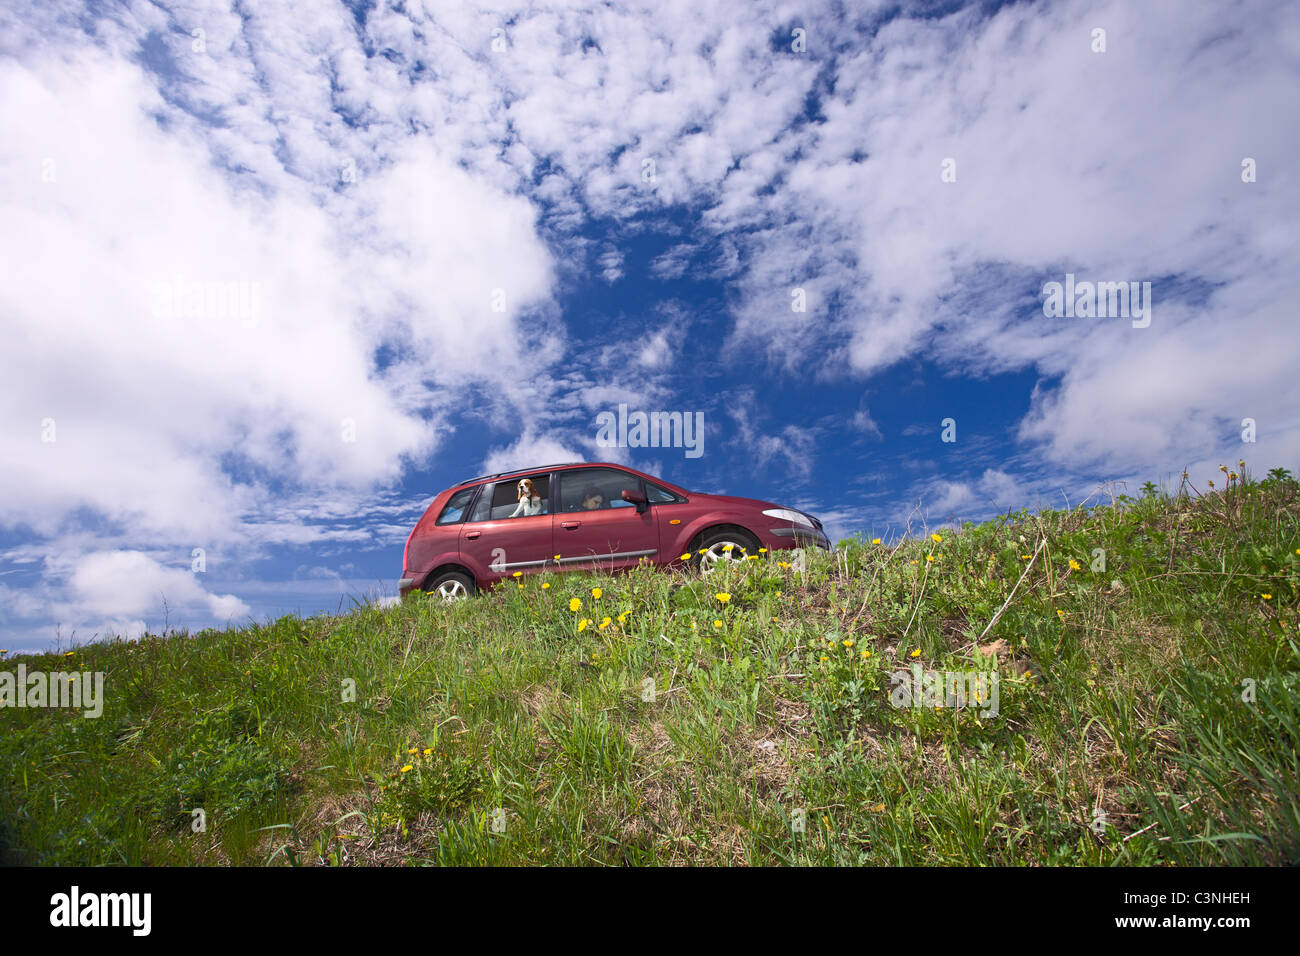 minivan on a background of cloudy sky. Stock Photo